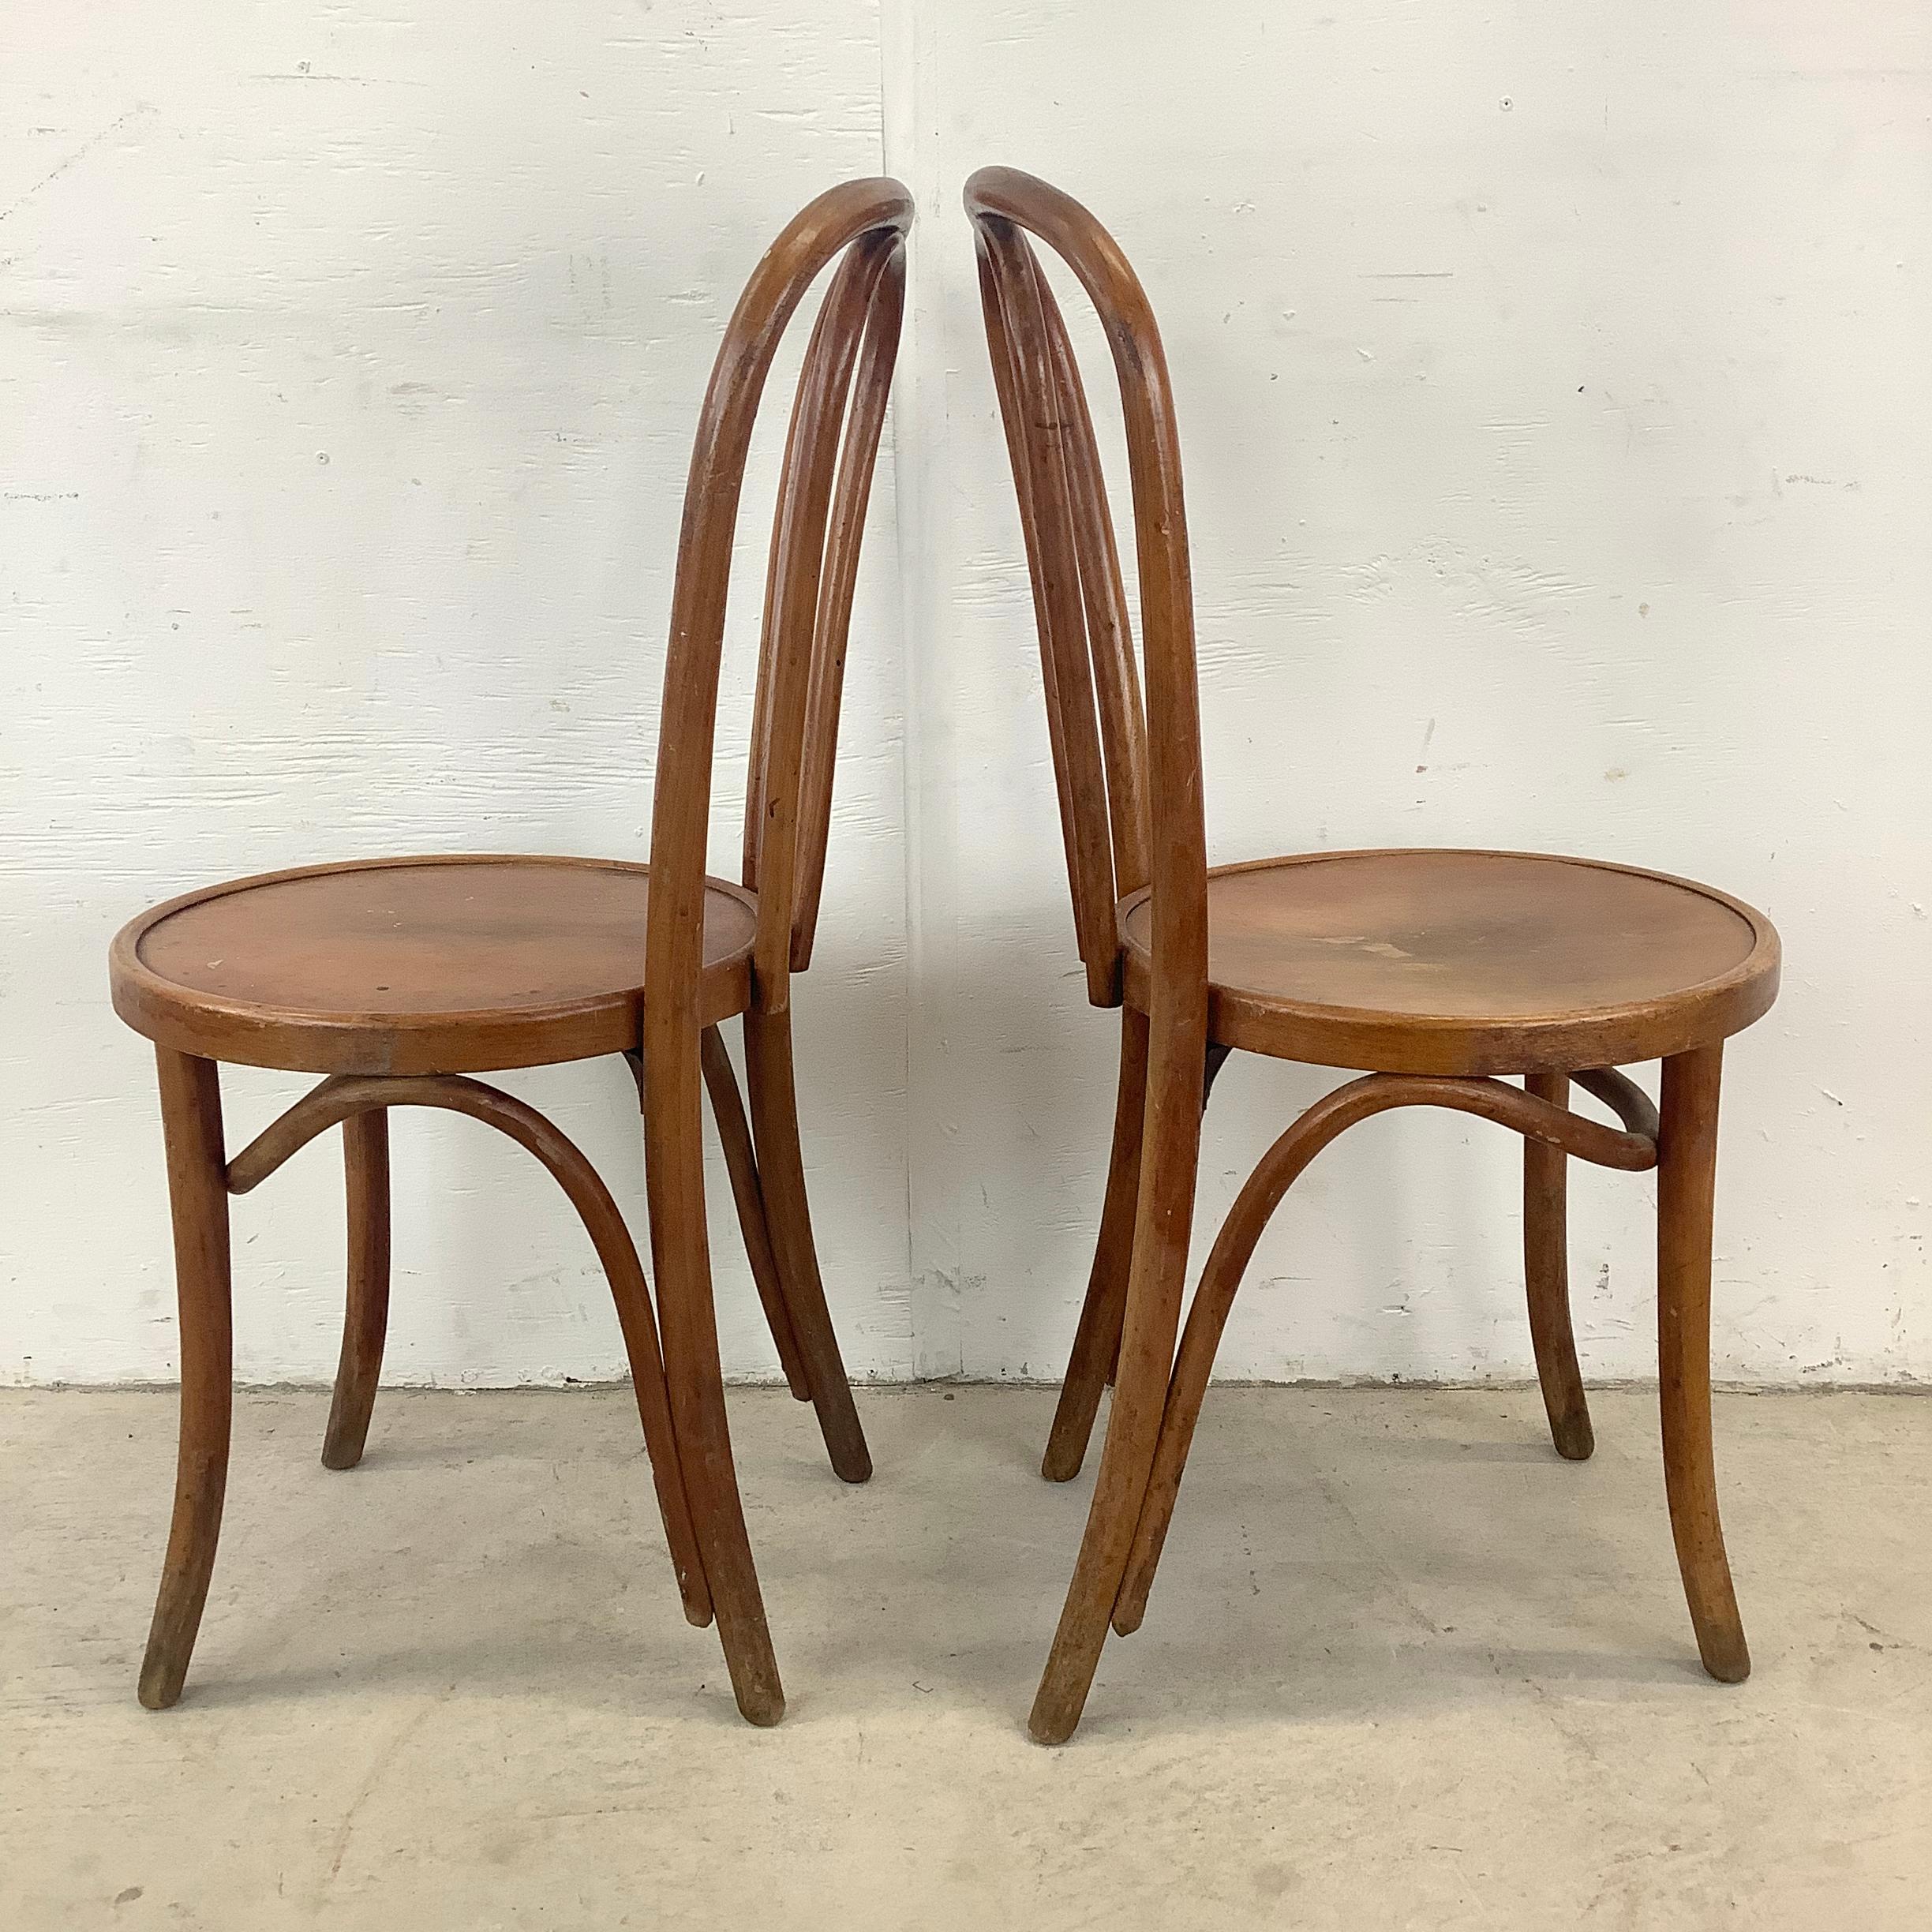 Other Pair Vintage Cafe Style Dining Chairs by Thonet